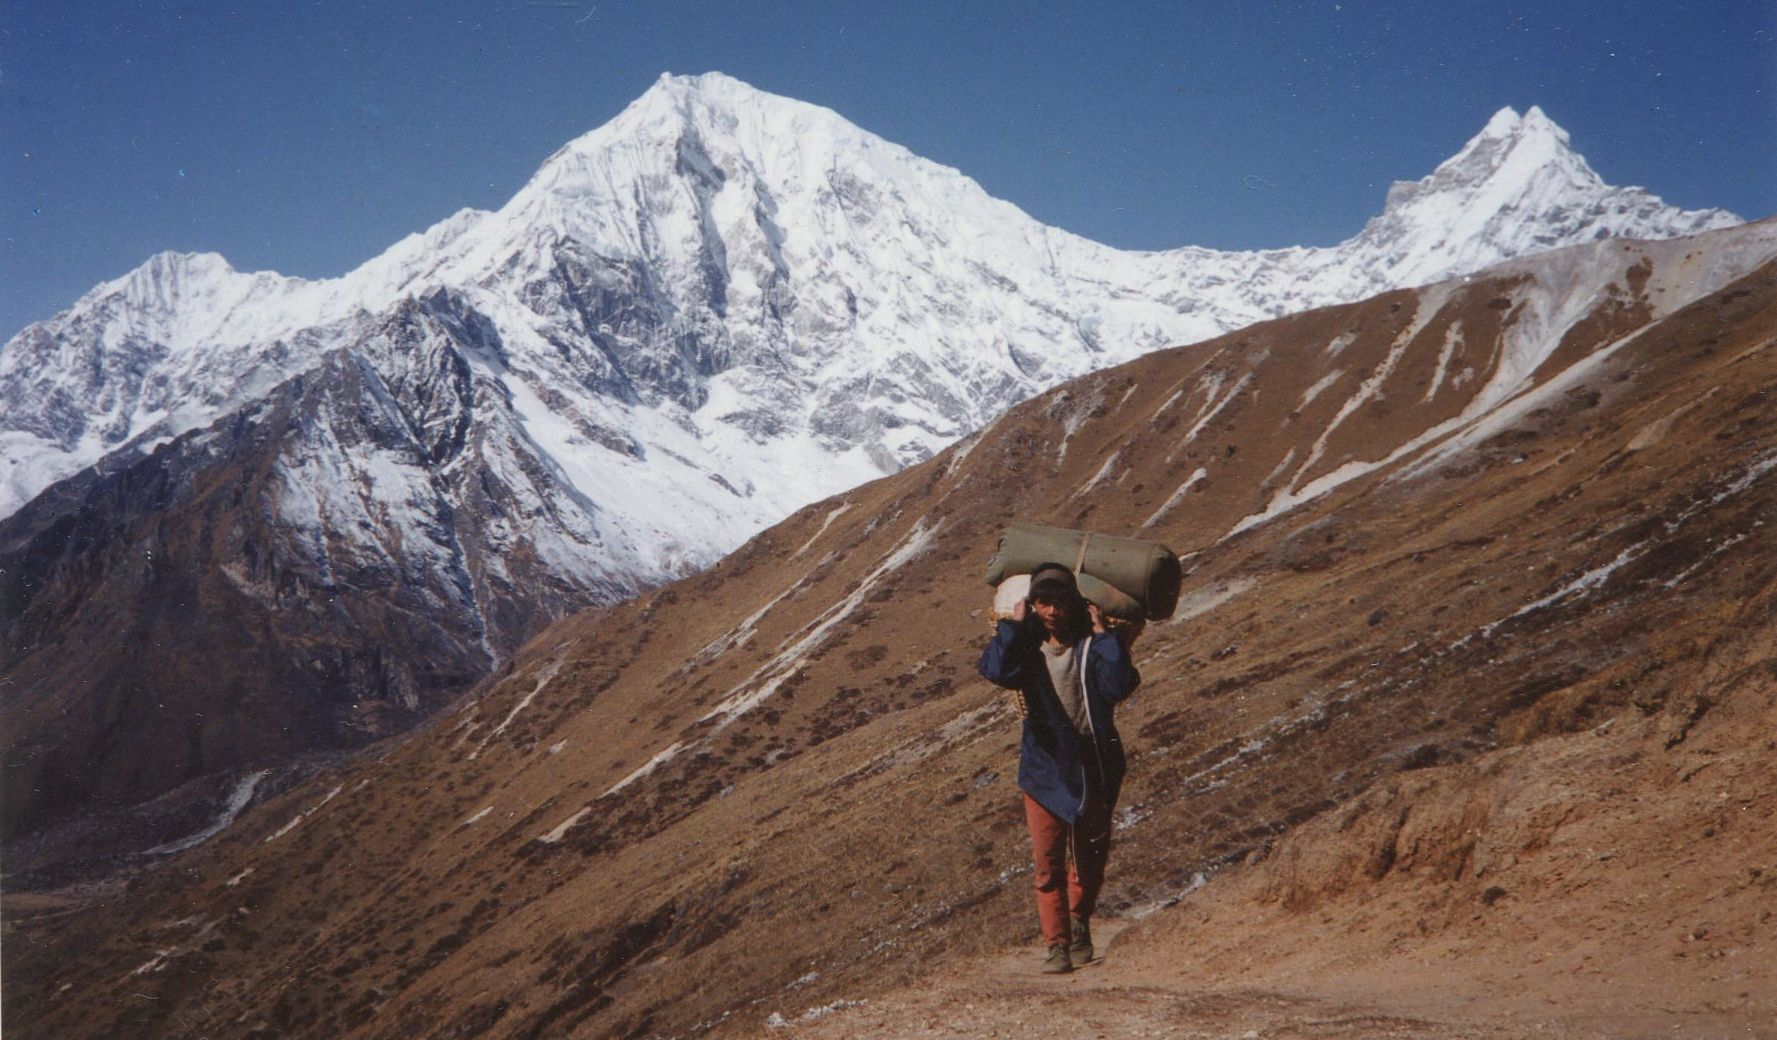 Mt.Langtang Lirung ( 7227m ) and Kimshung on ascent to Yala in the Langtang Valley